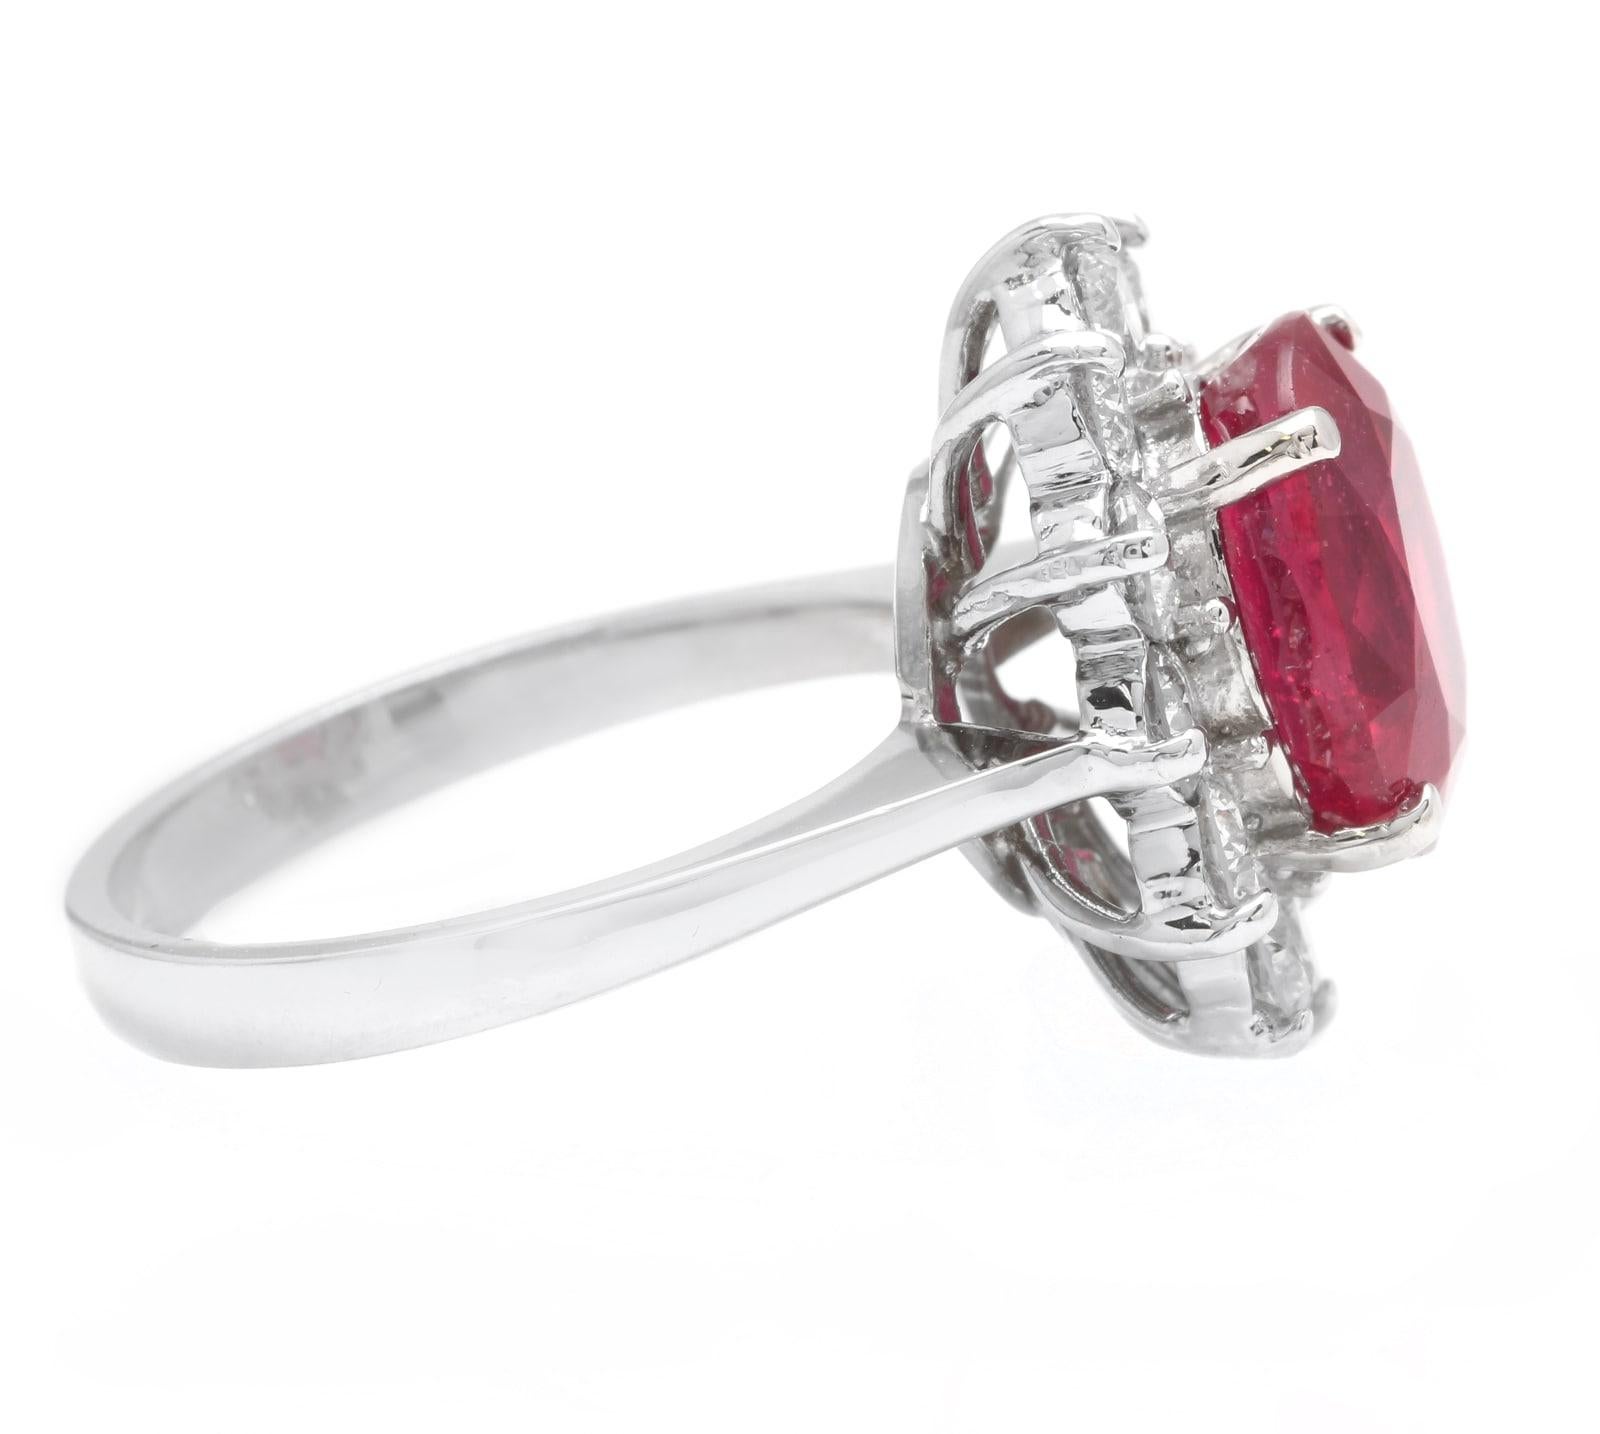 Mixed Cut 7.60 Carats Impressive Red Ruby and Diamond 14K Solid White Gold Ring For Sale